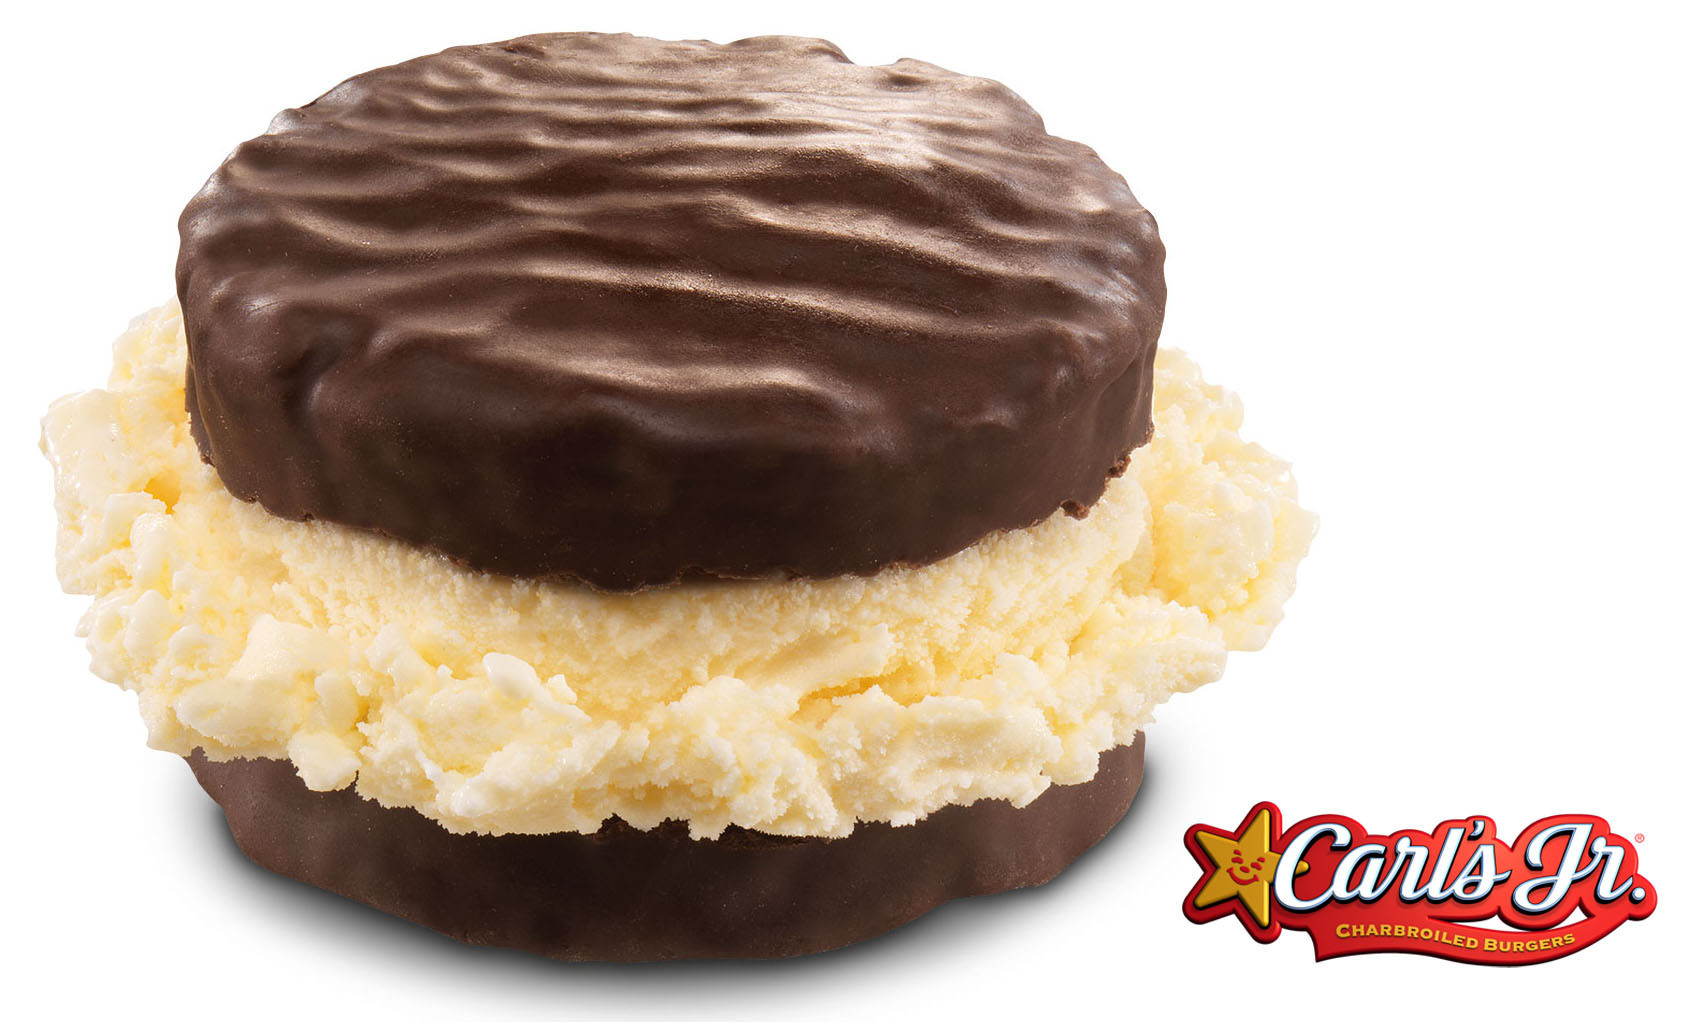 Carls Jr Dessert
 Ding Dong the Dessert of Your Dreams is Here at Carl’s